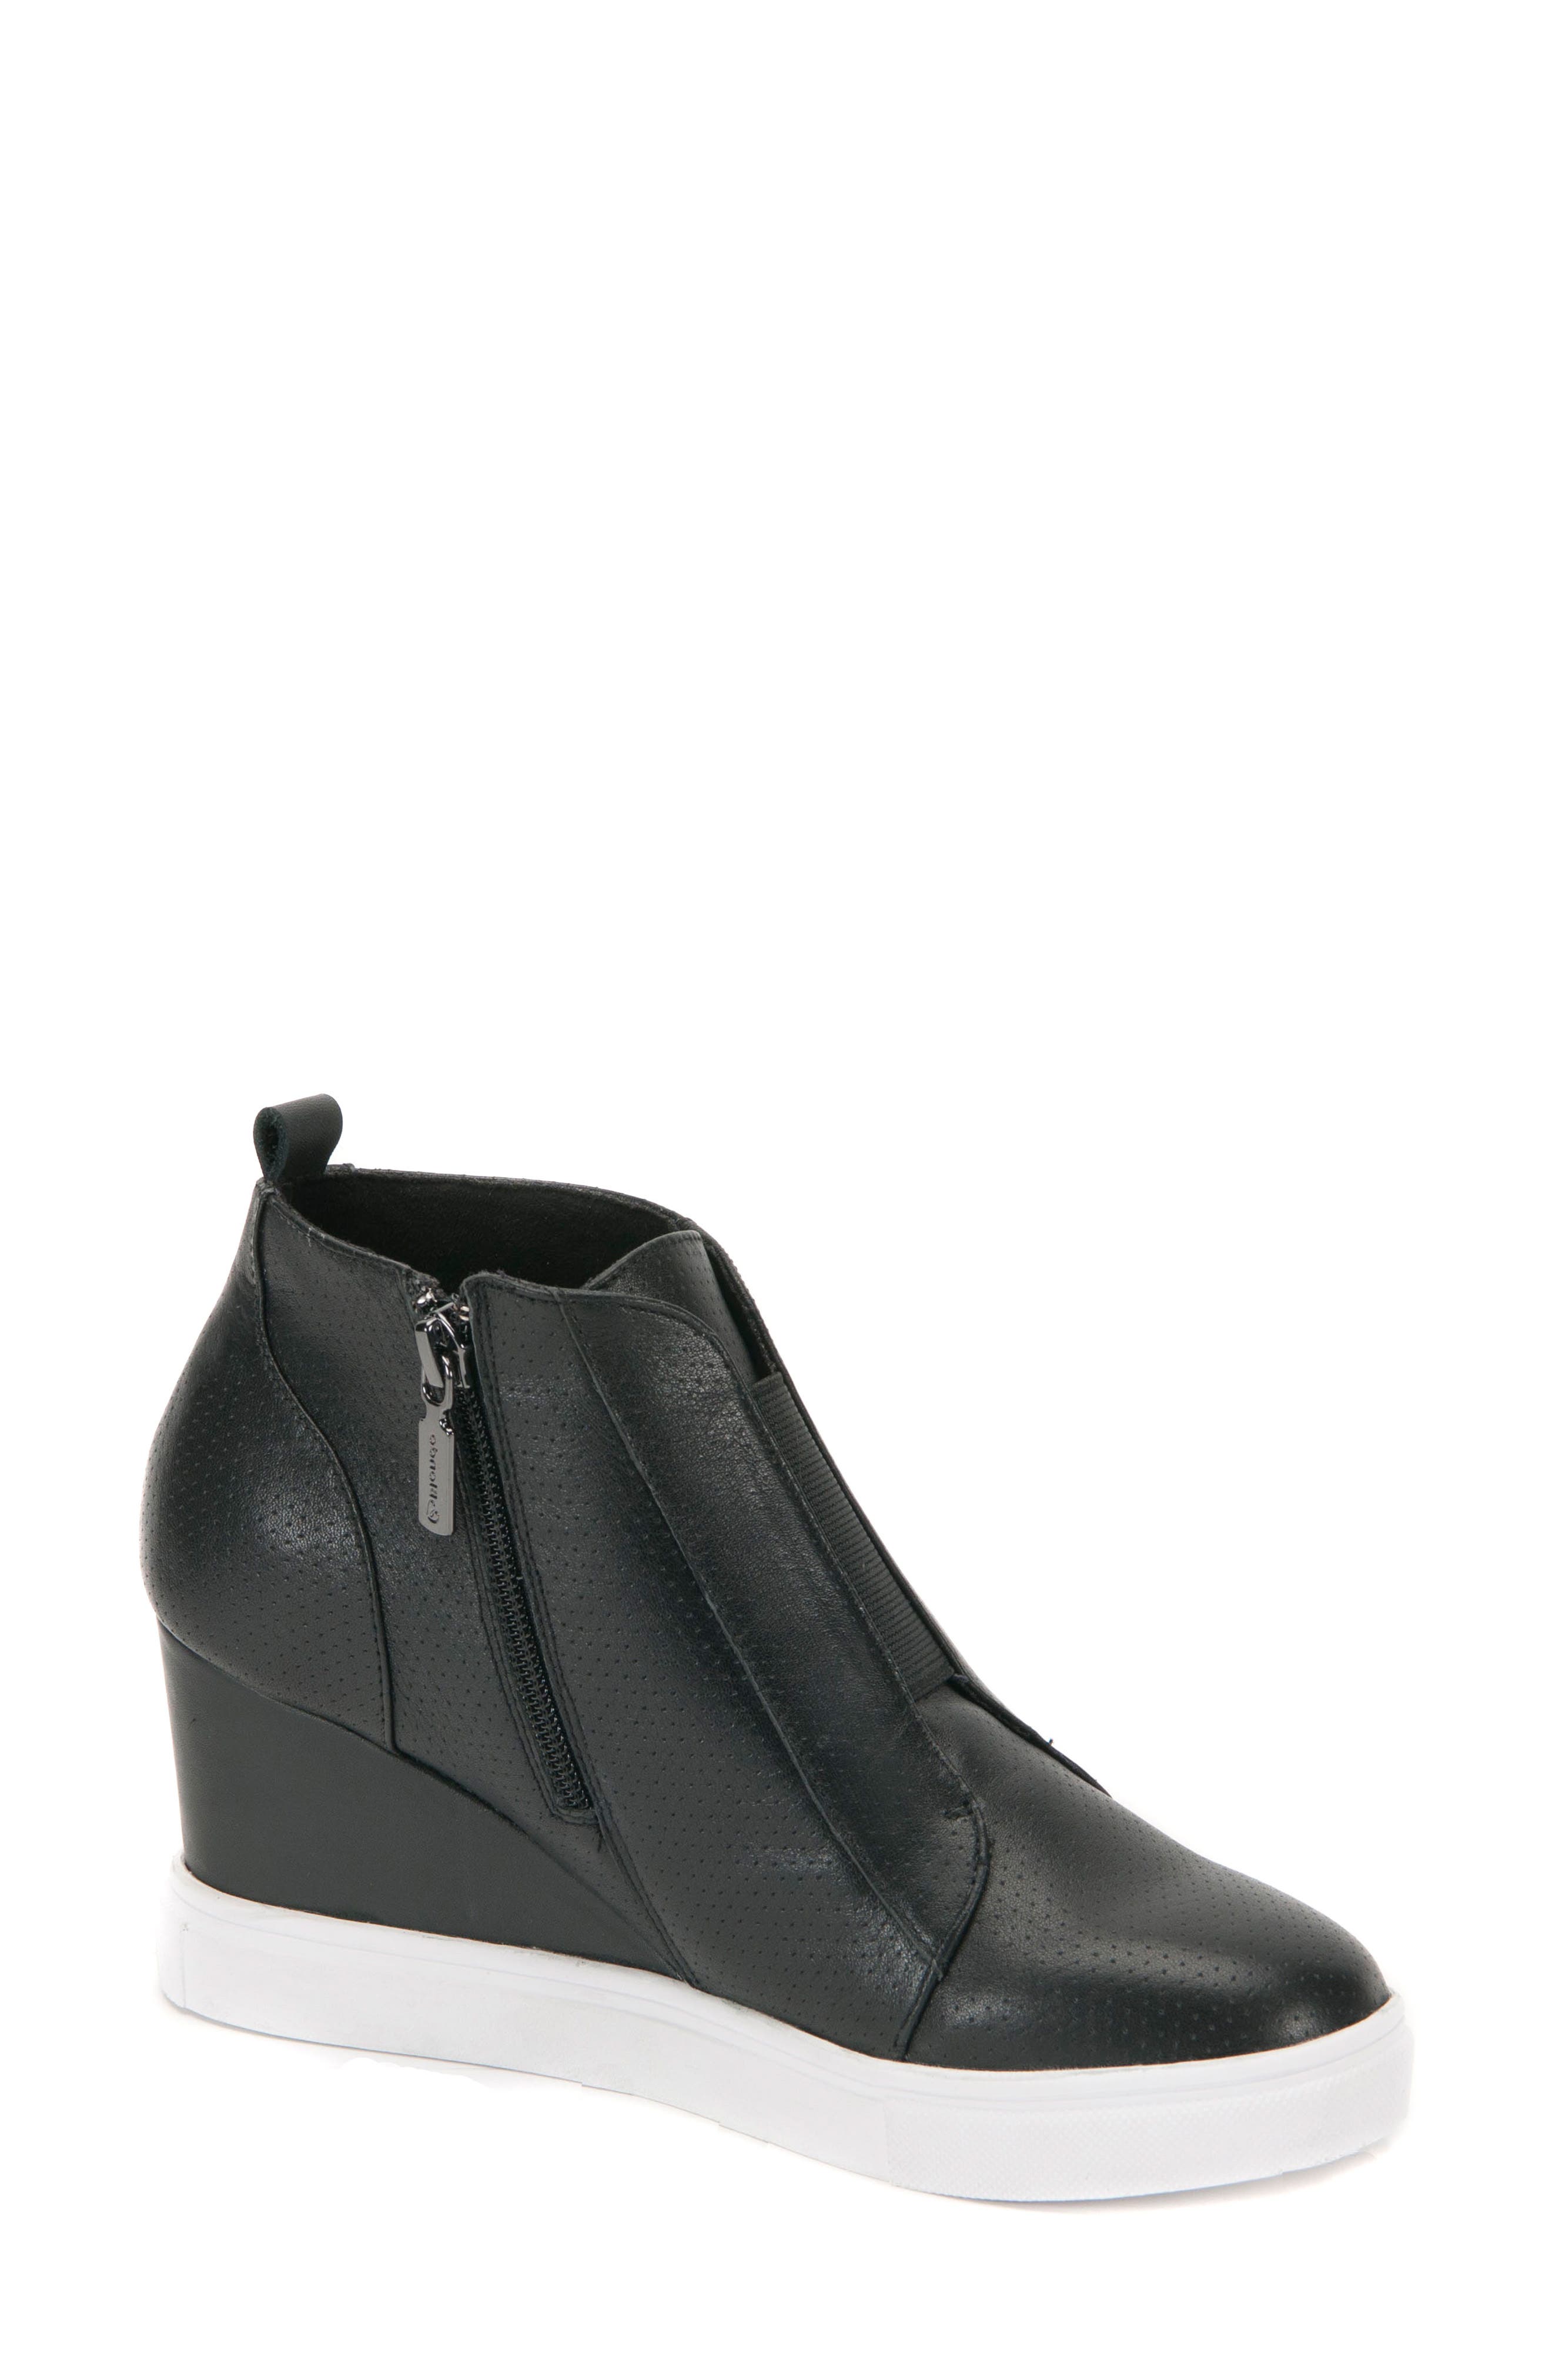 Women's Blondo Wedge Ankle Boots 